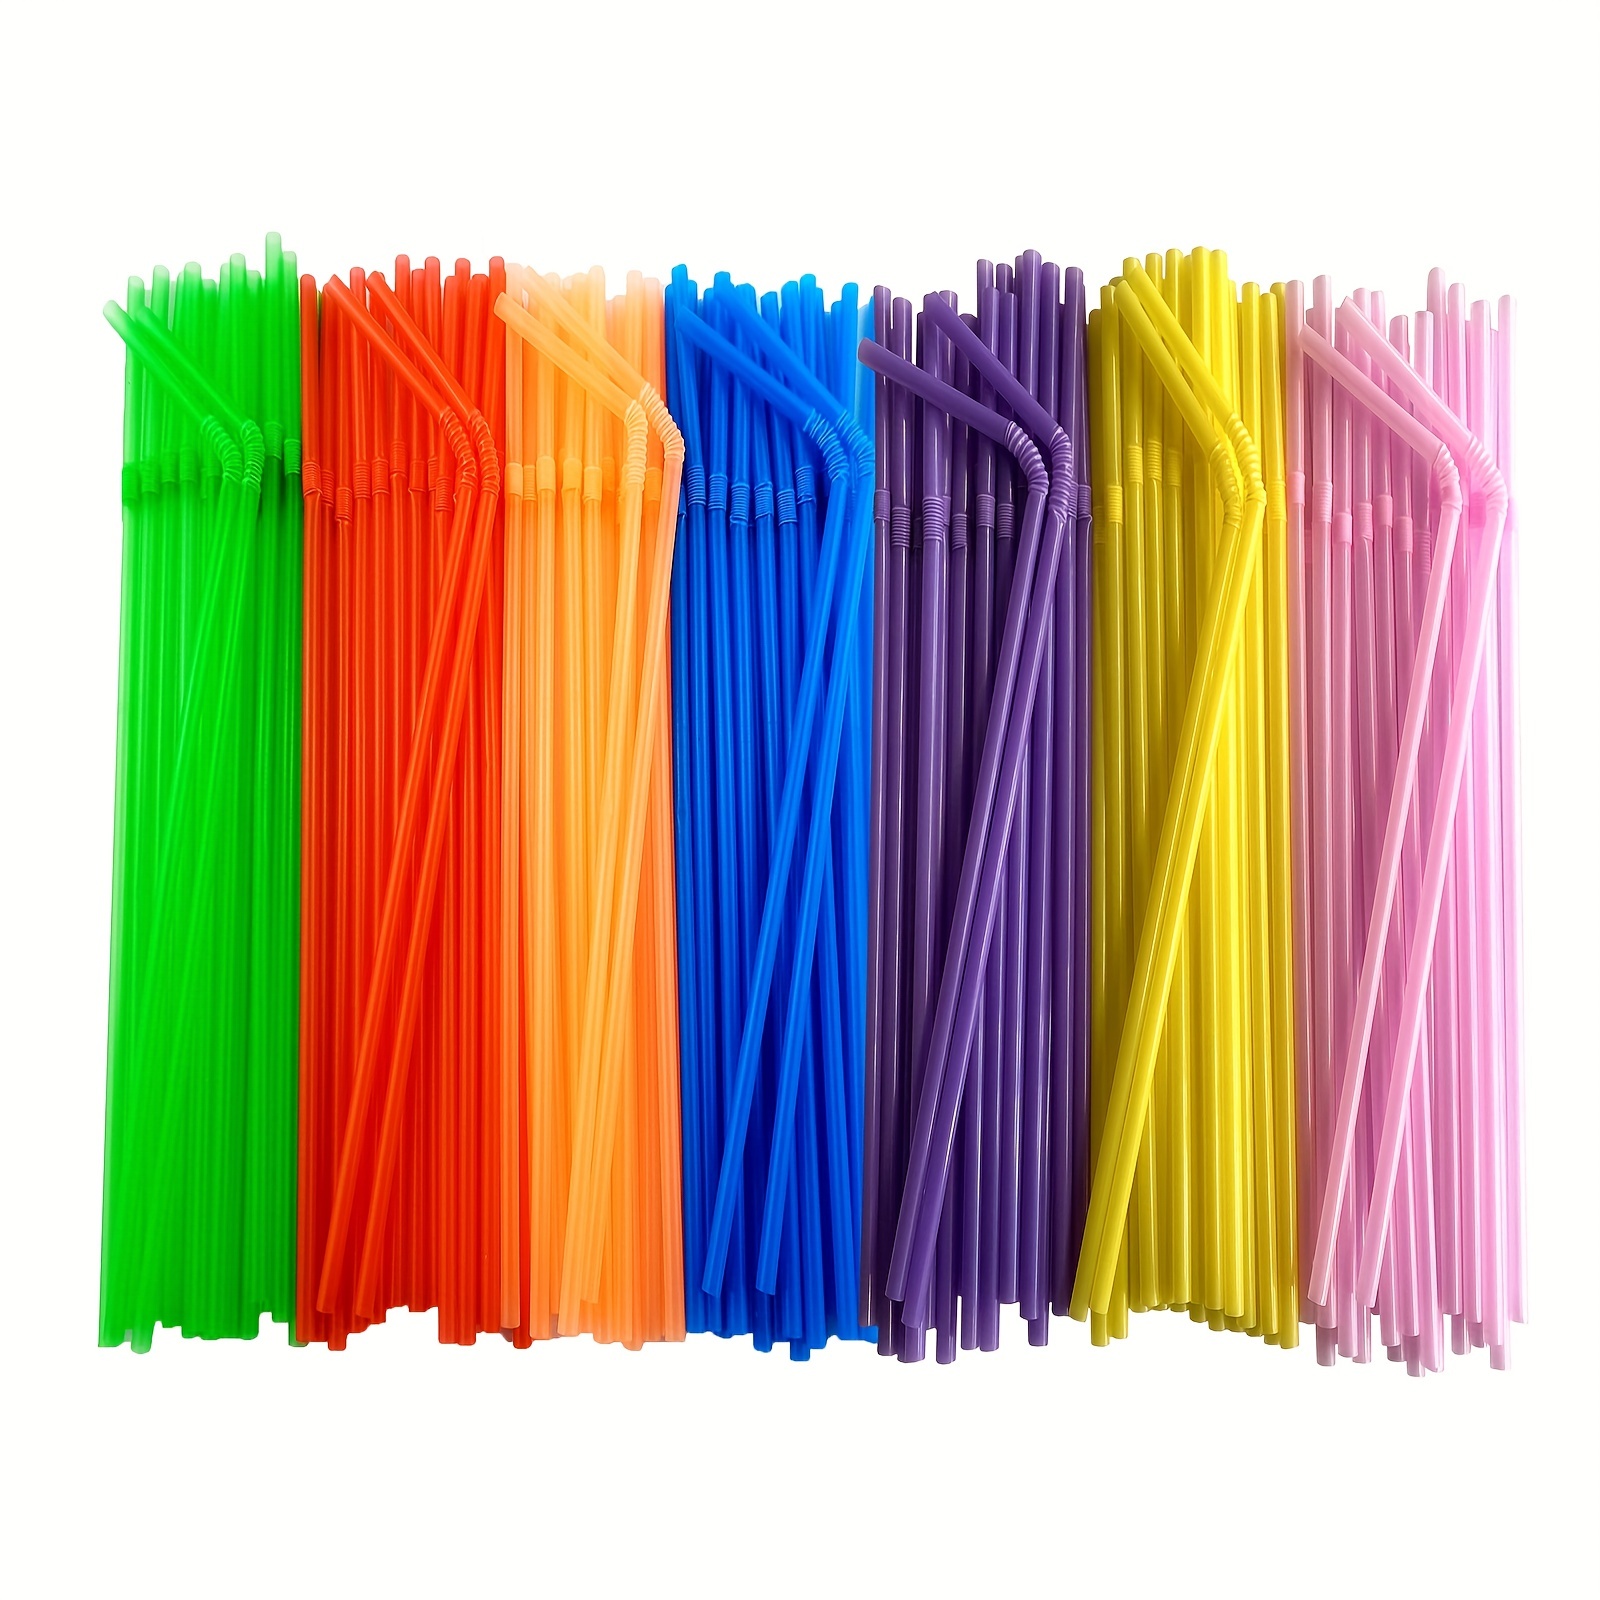 Colorations Paper Art Straws - Set of 100